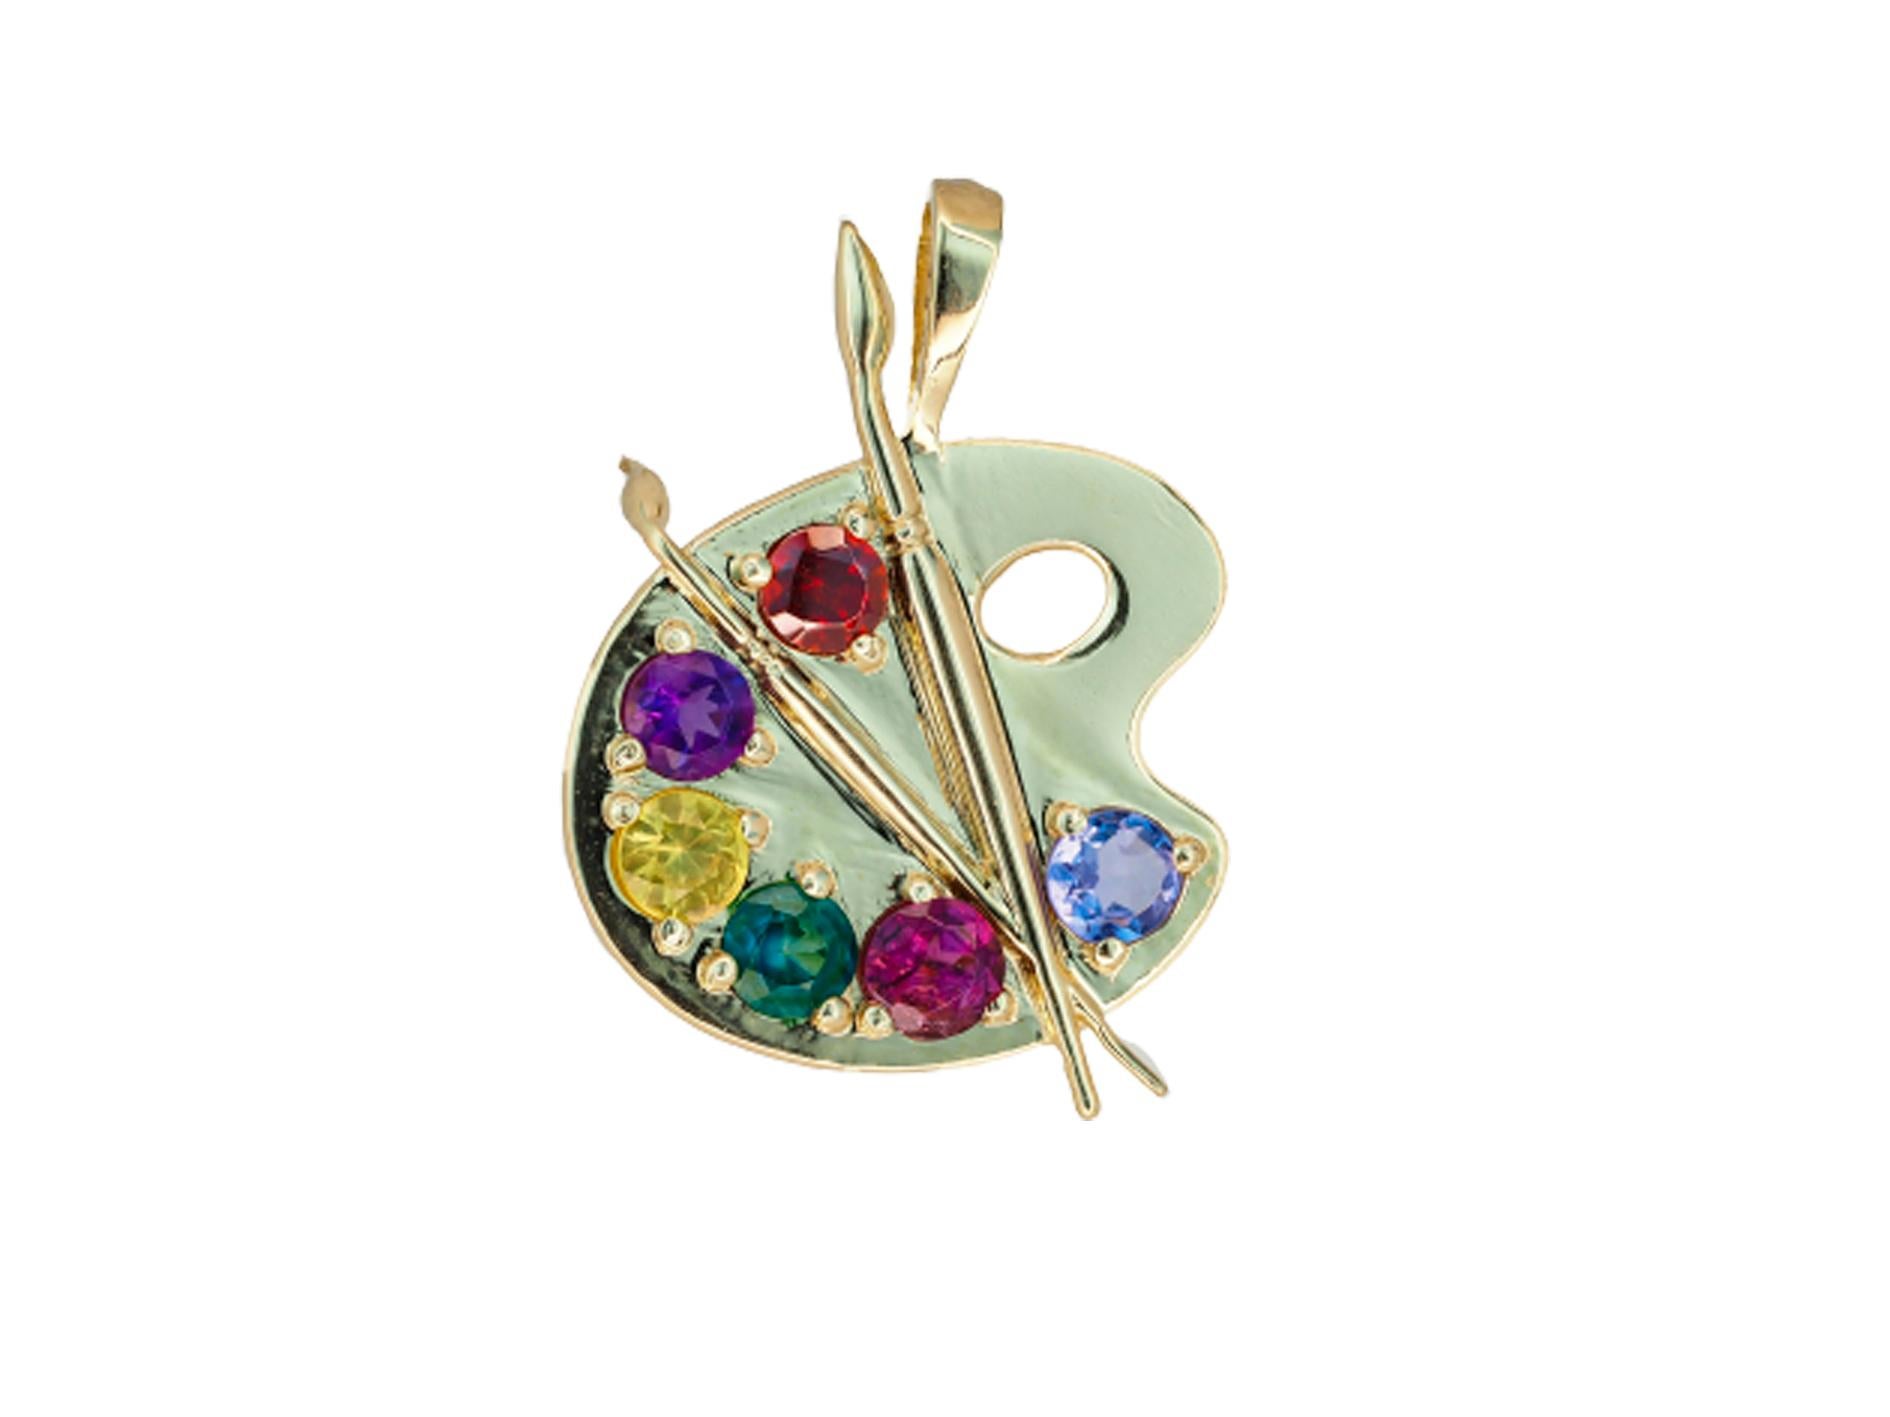 Palette with Paints 14k Gold Pendant with Colored Stones For Sale 7